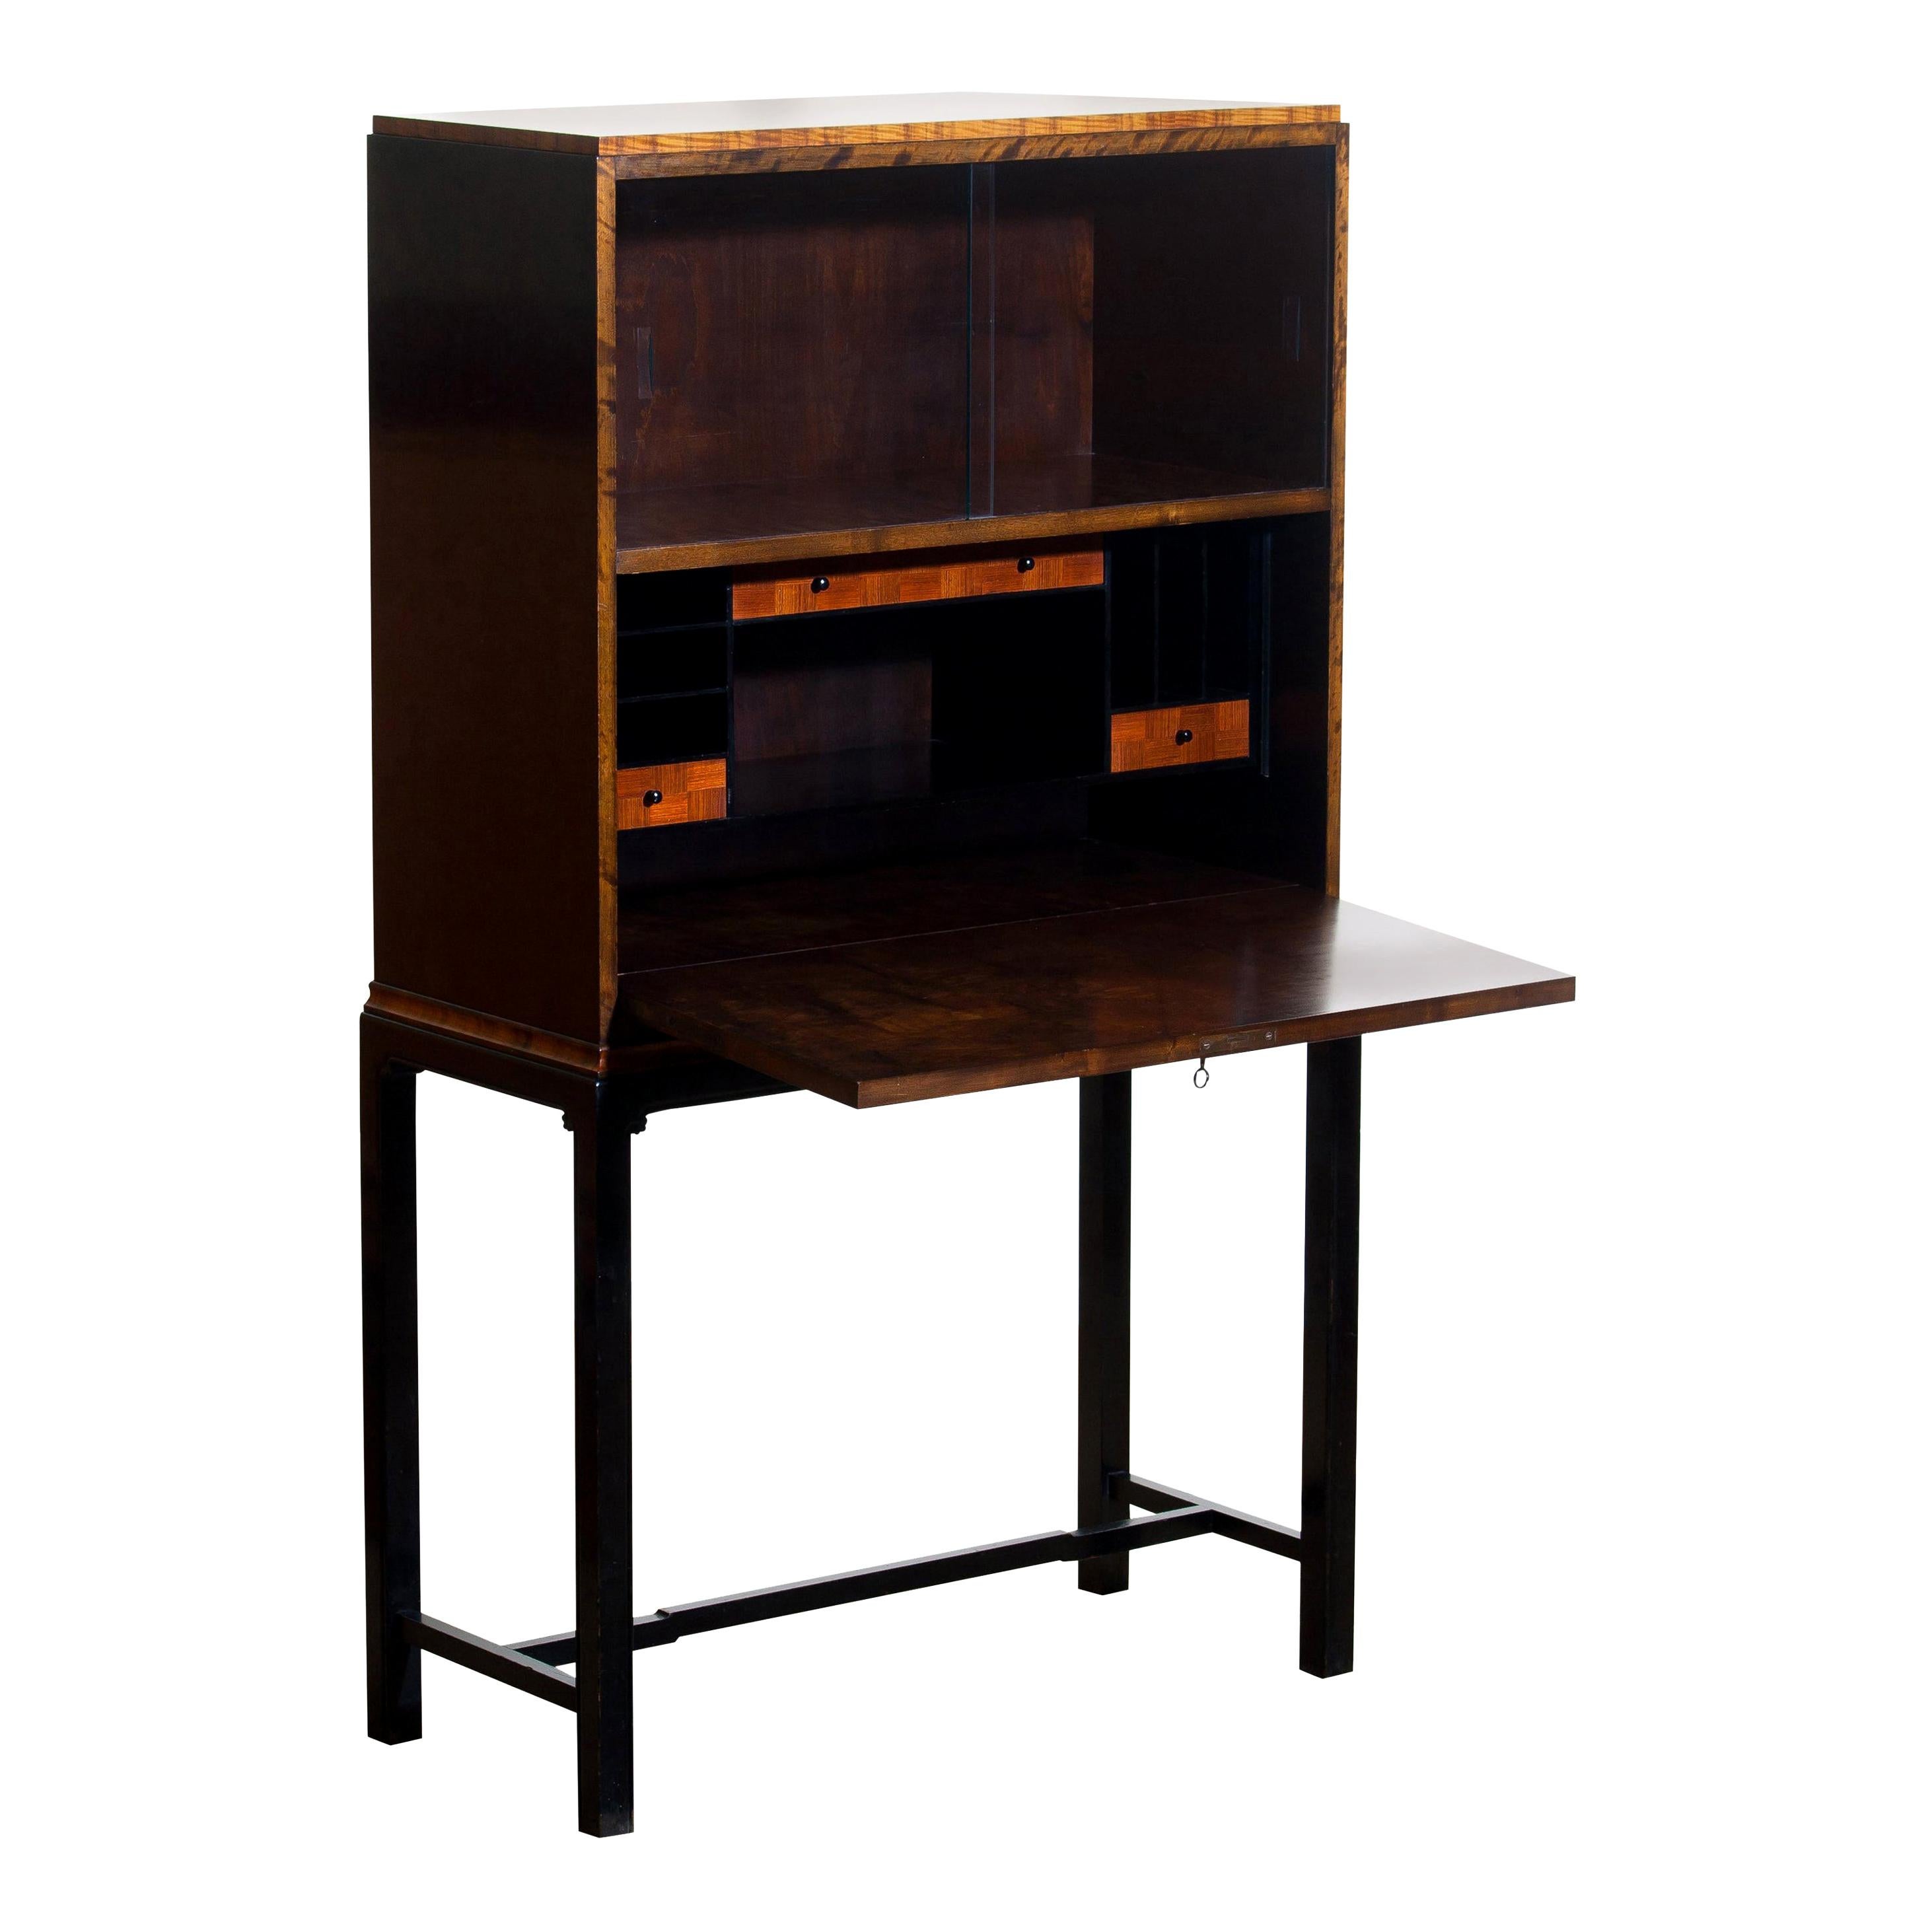 1920s, unique secretaire designed by Axel Einar Hjorth and manufactured in 1924 by Nordiska Kompaniet, numbered L228.
This unique Art Deco secretaire is designed as a come-in to the USA for Nordiska Kompaniet.

The secretaire is veneered with